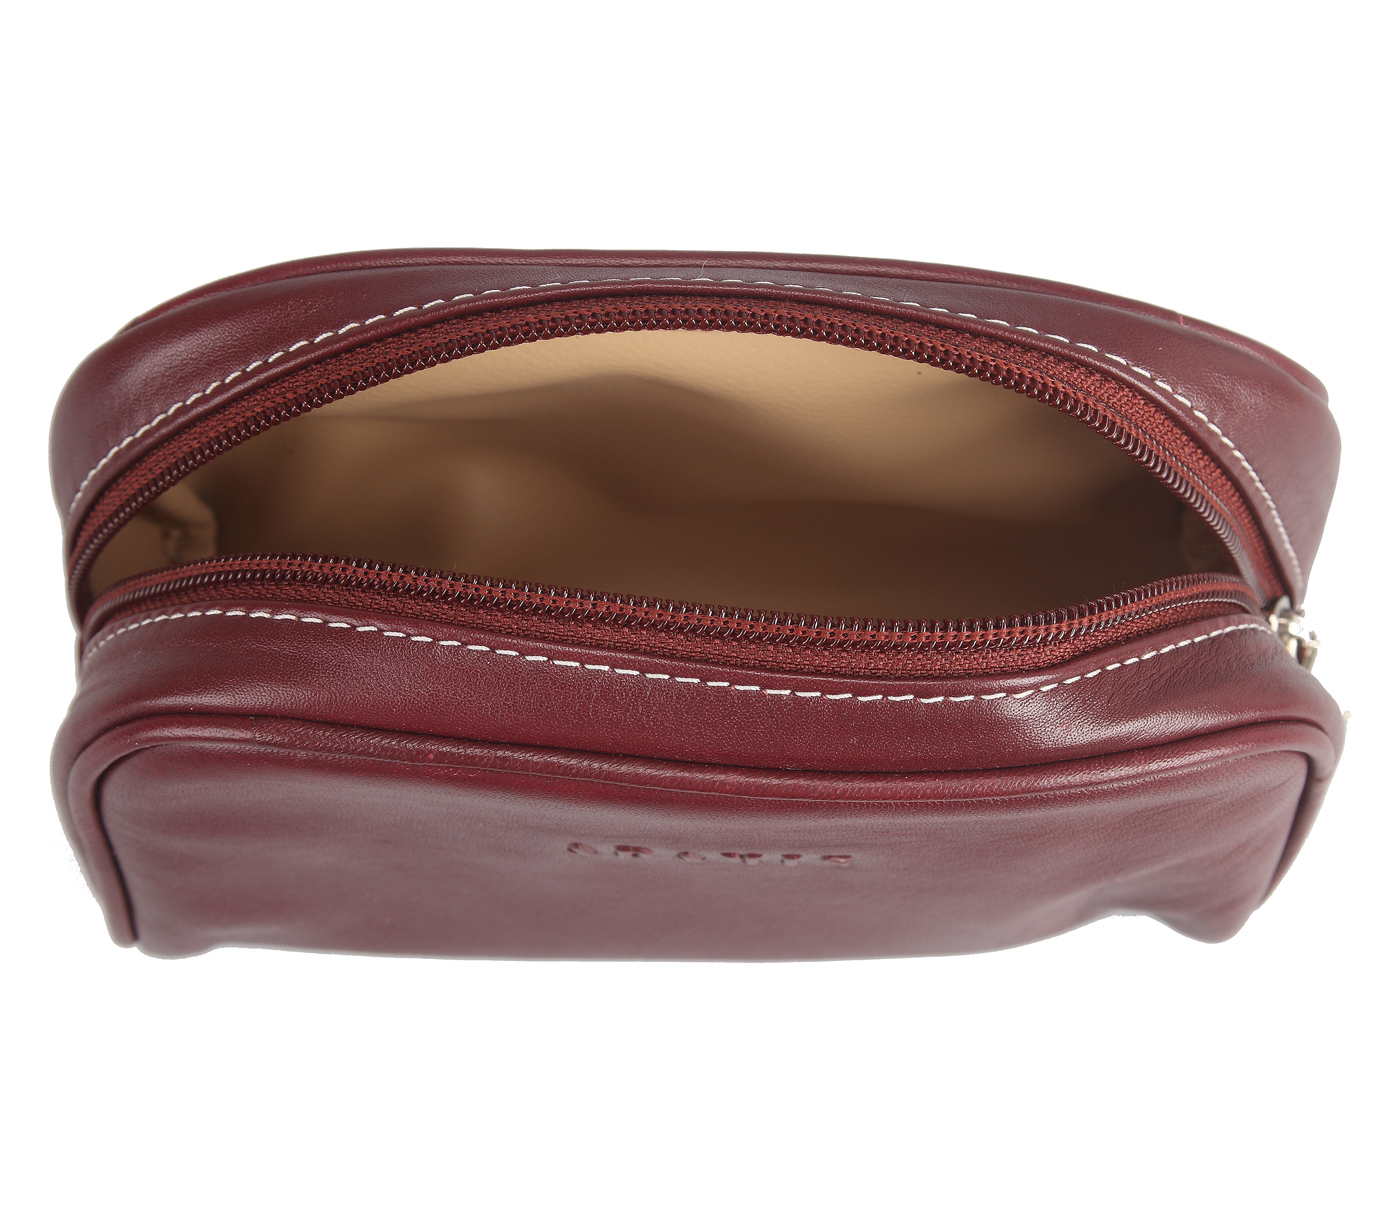 Travel Essential--Unisex Wash & Toiletry travel Bag in Genuine Leather - Wine